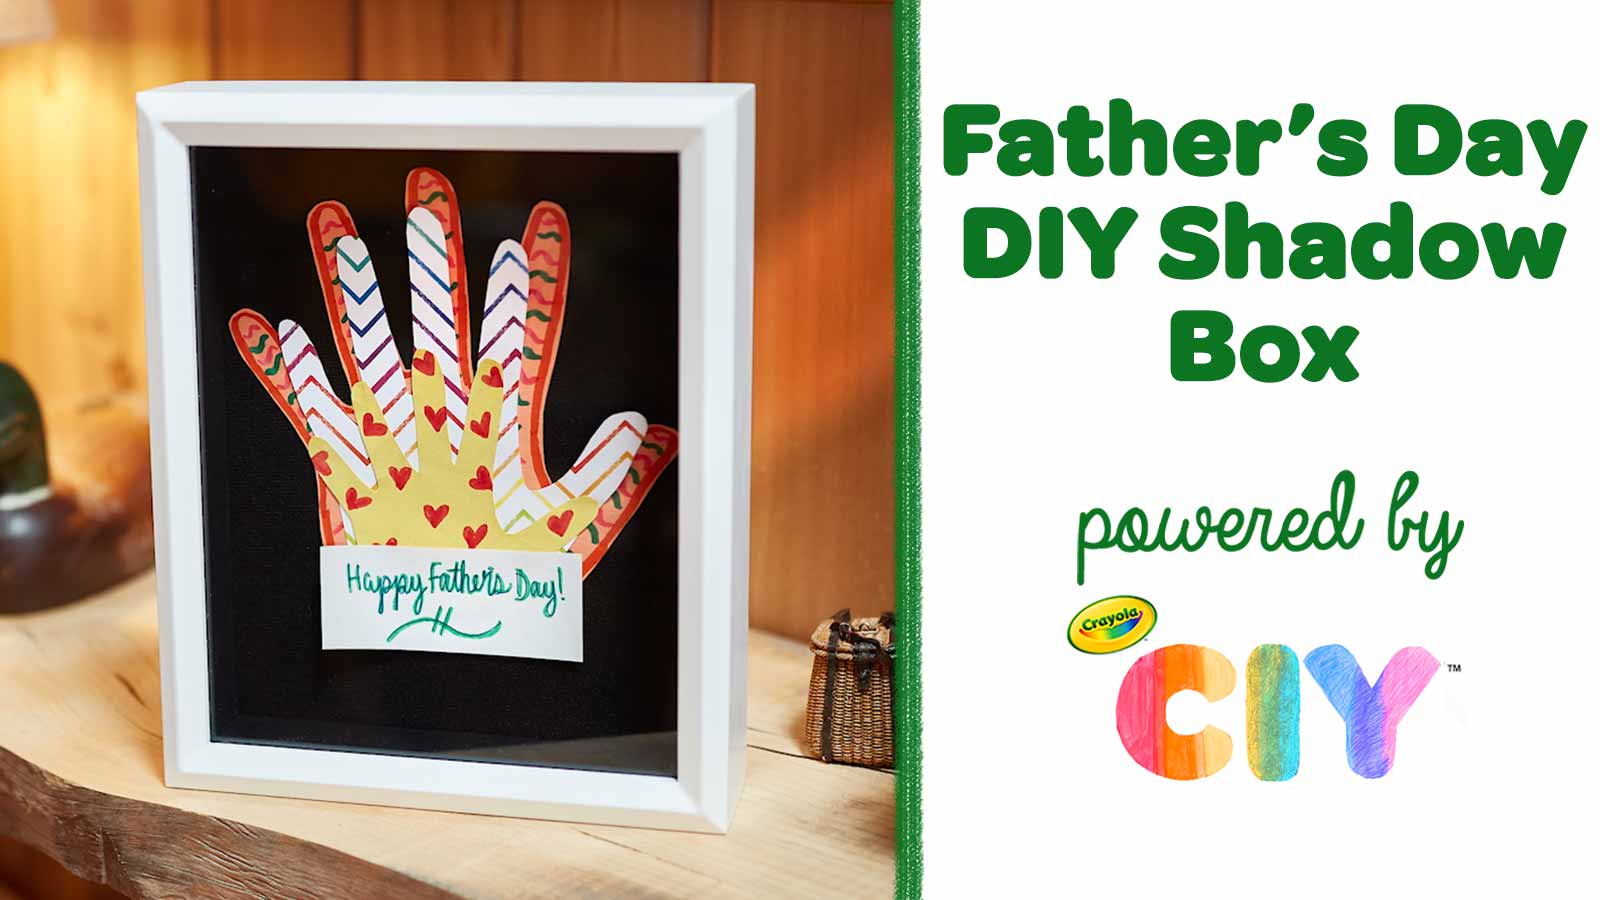 Father's Day DIY Shadow Box, DIY Gift, Craft, , Crayola CIY,  DIY Crafts for Kids and Adults